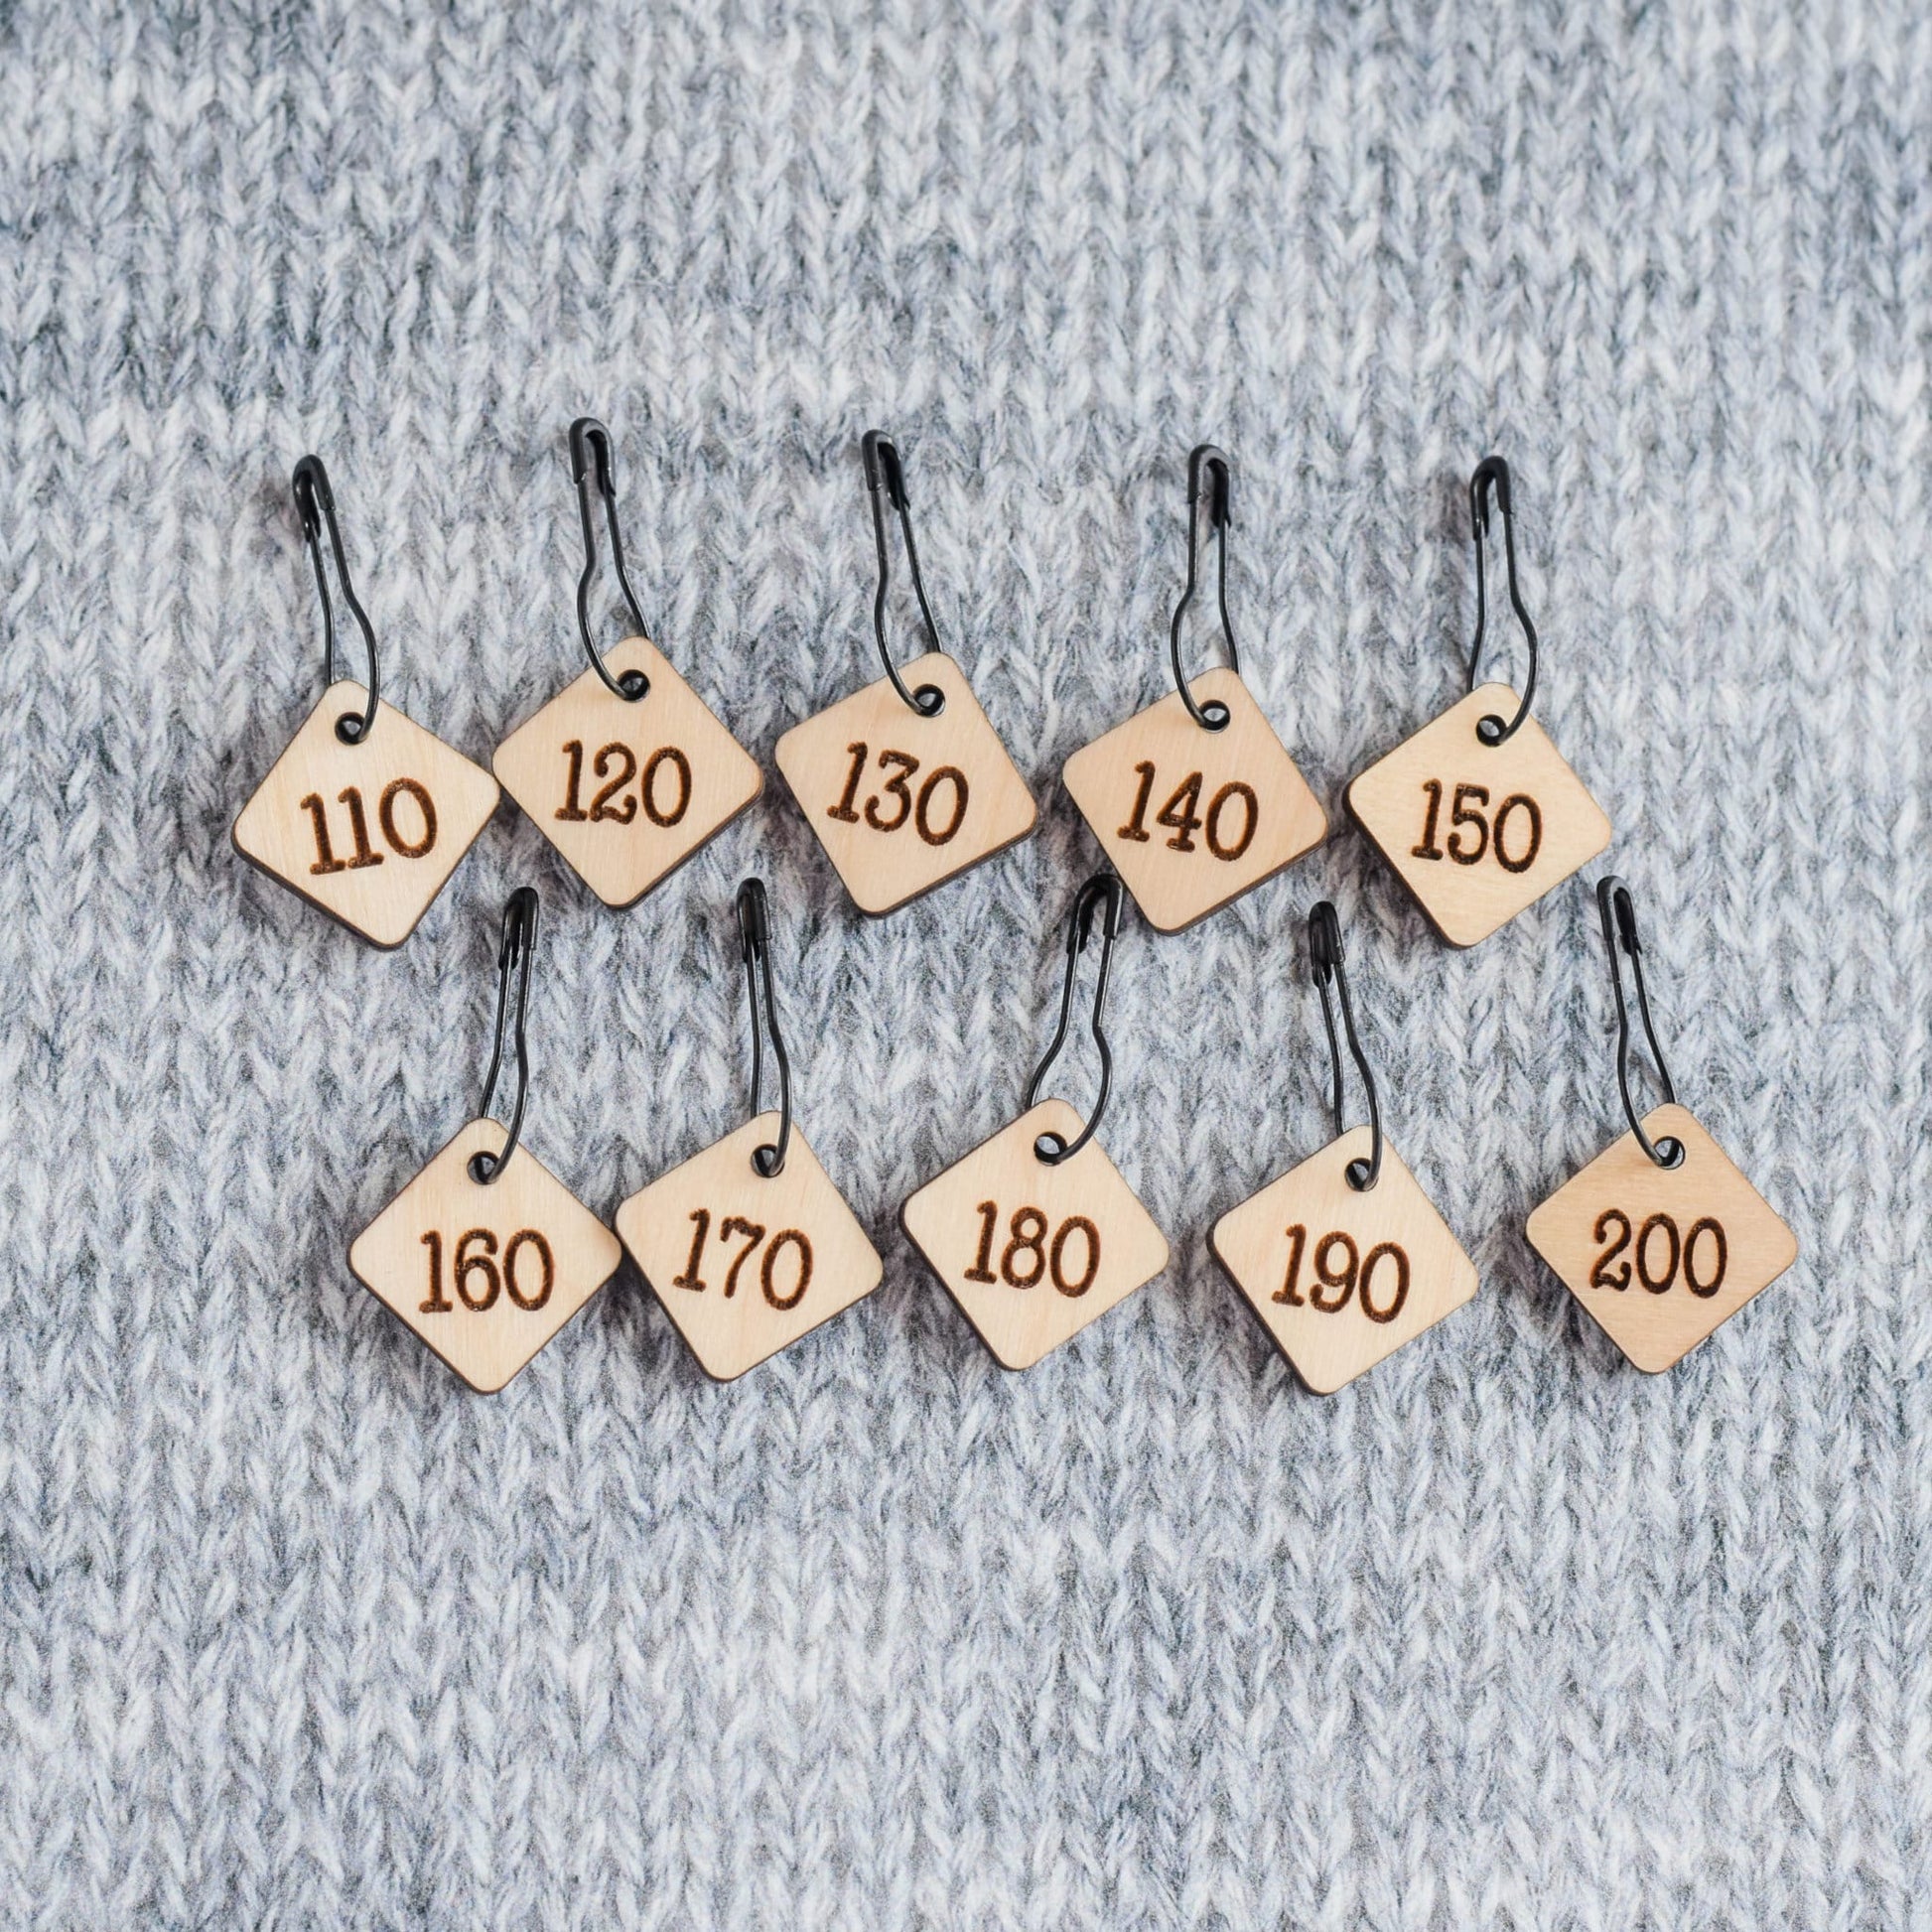 Set of 10 Removable Stitch Markers - 110-200 - Cast On Counting Numbers, Laser Engraved Wood Stitch Markers, Counting Stitch Markers - Birch